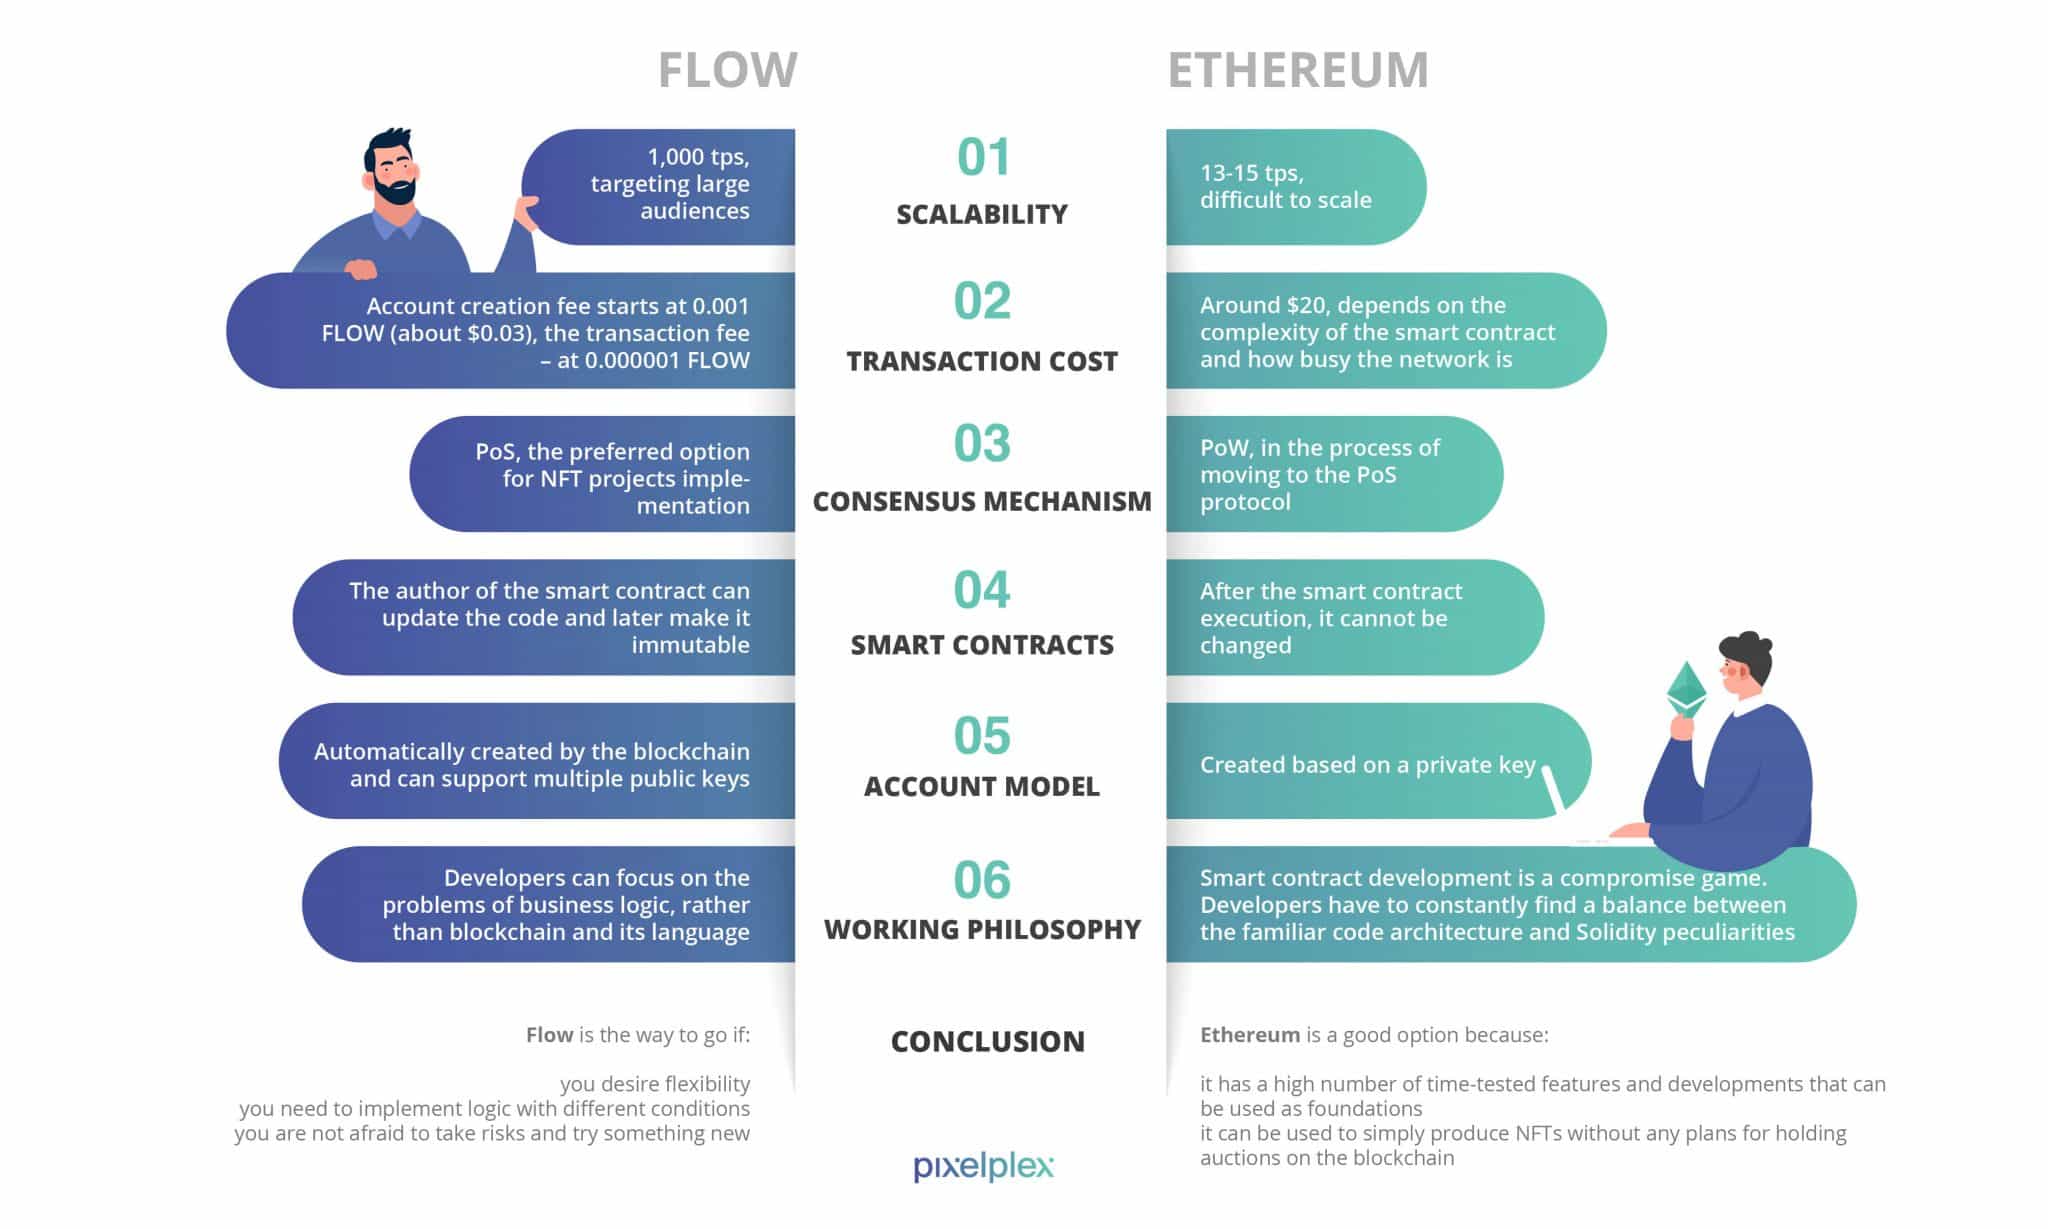 The comparison table of Flow and Ethereum blockchains